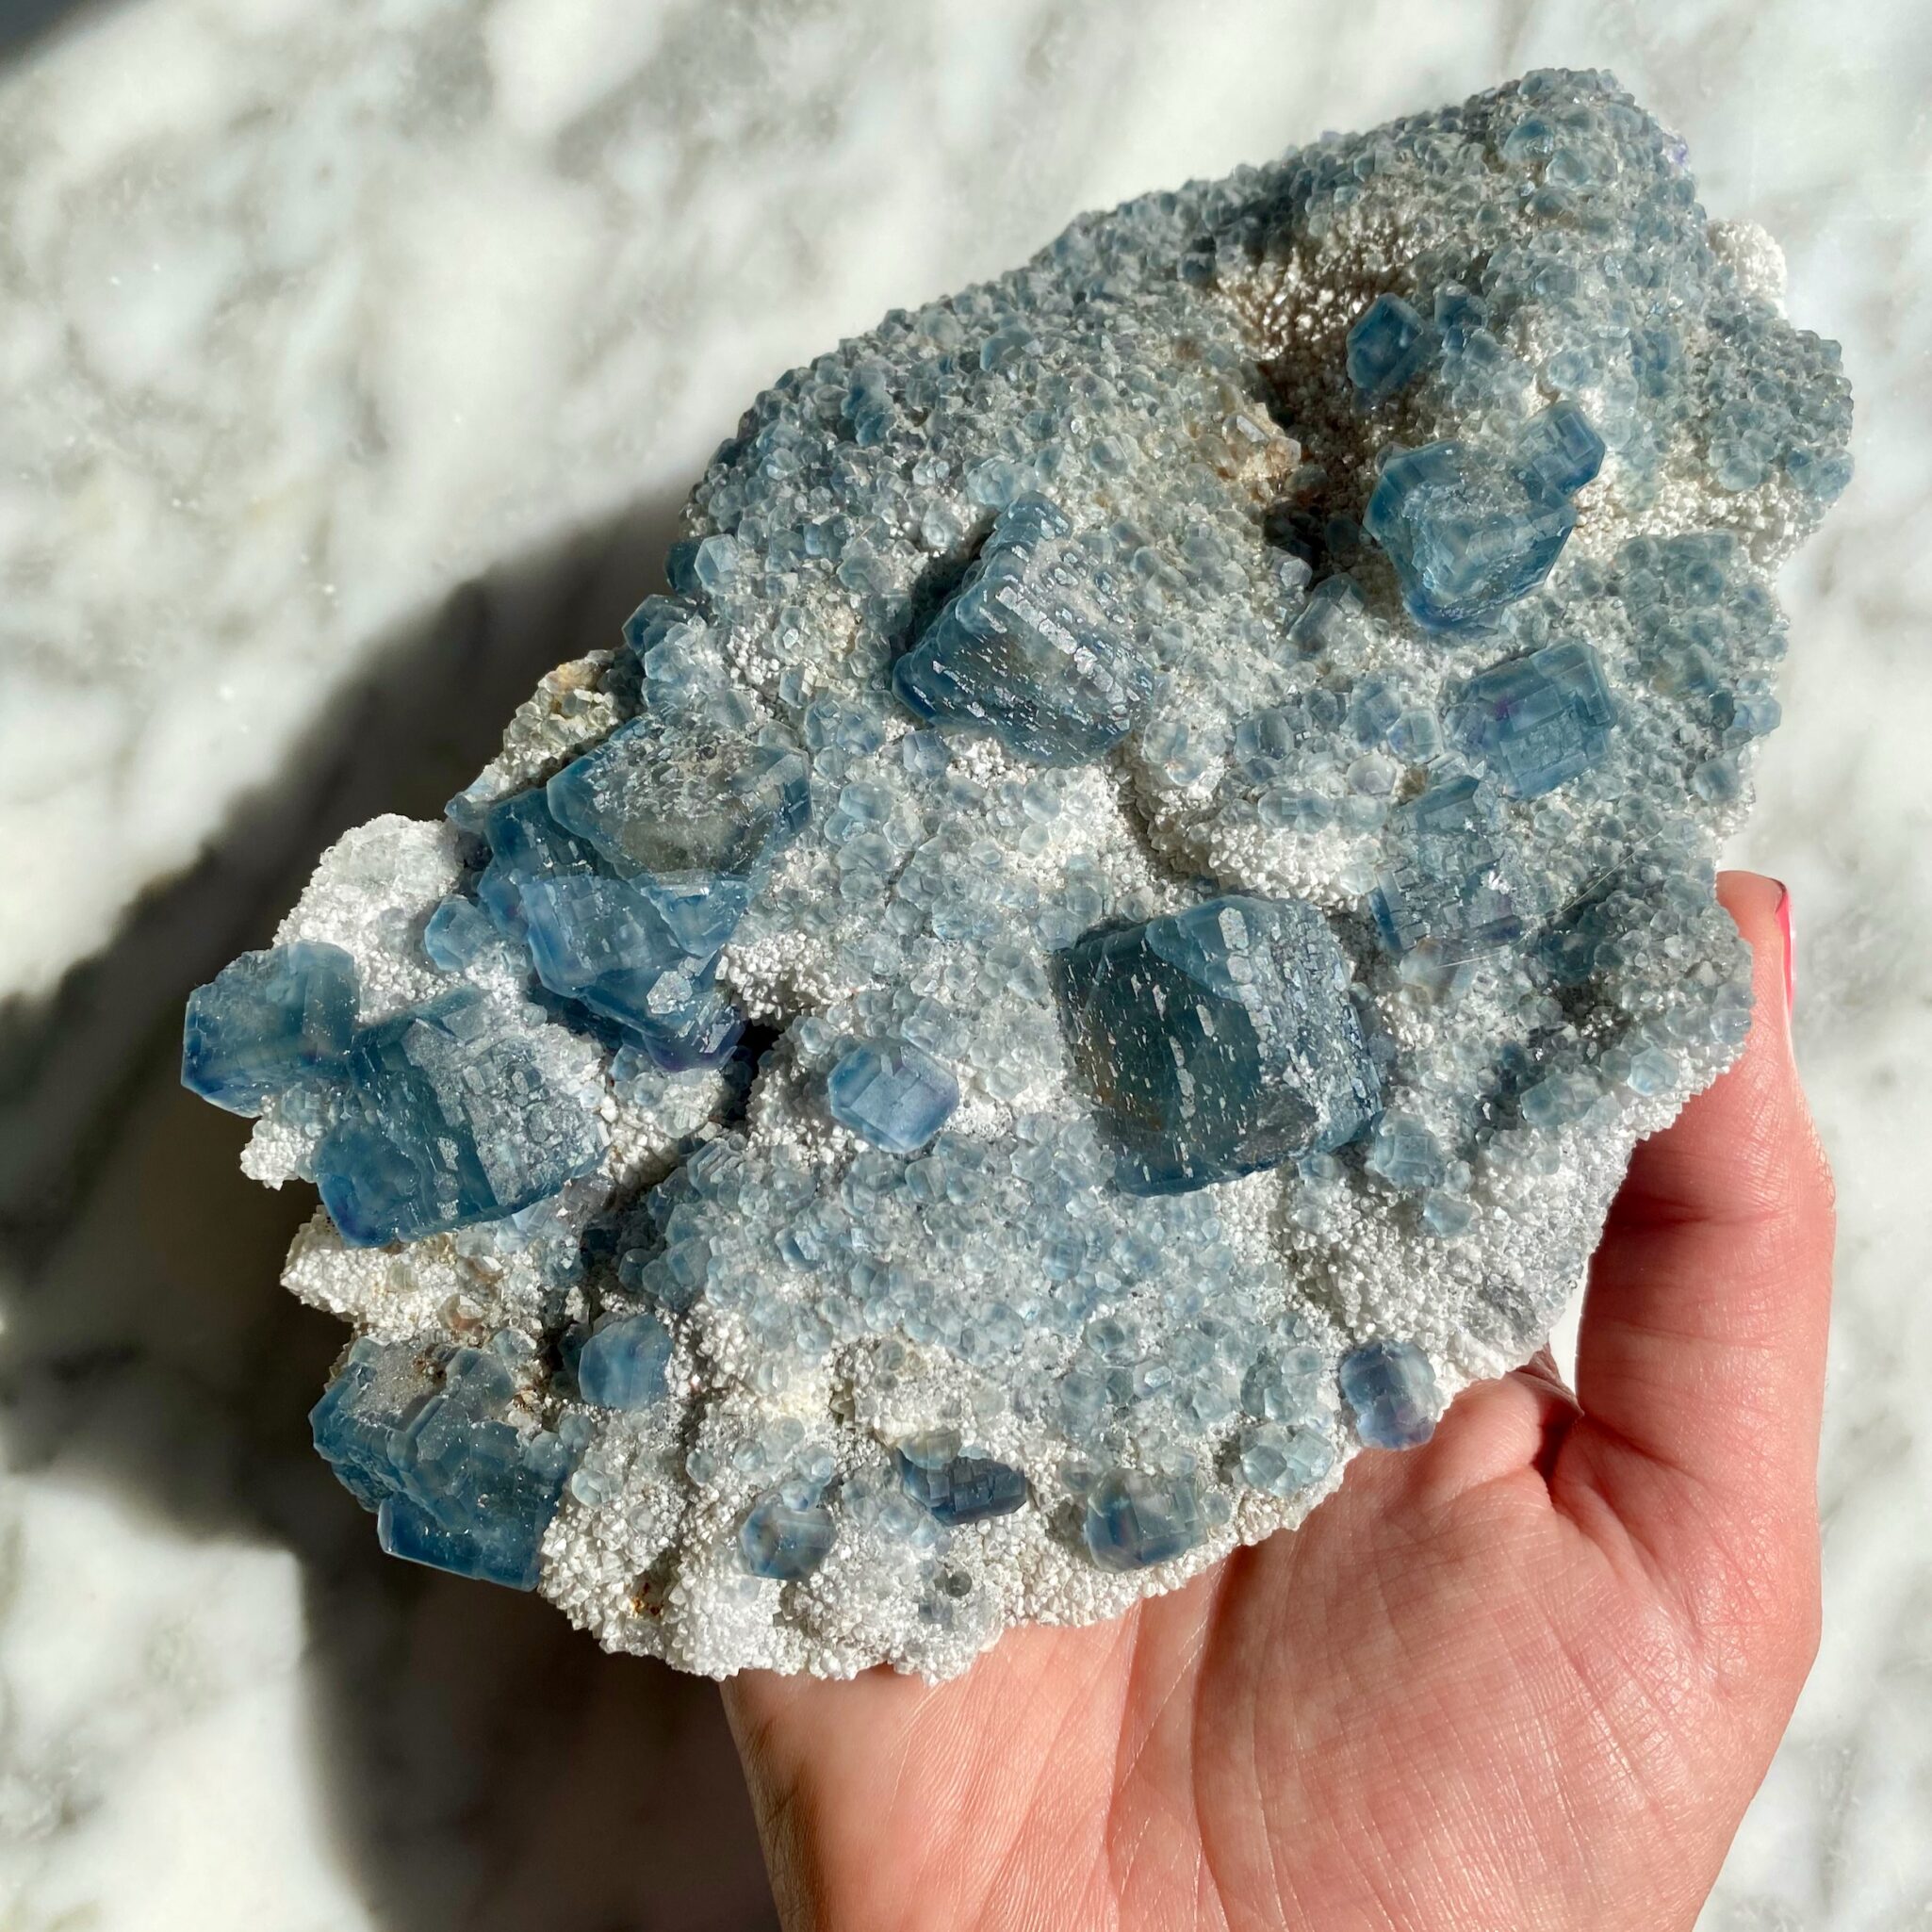 blue fluorite plate from xia yang mine - Plaque de Fluorite Bleue de la Mine Xia Yang